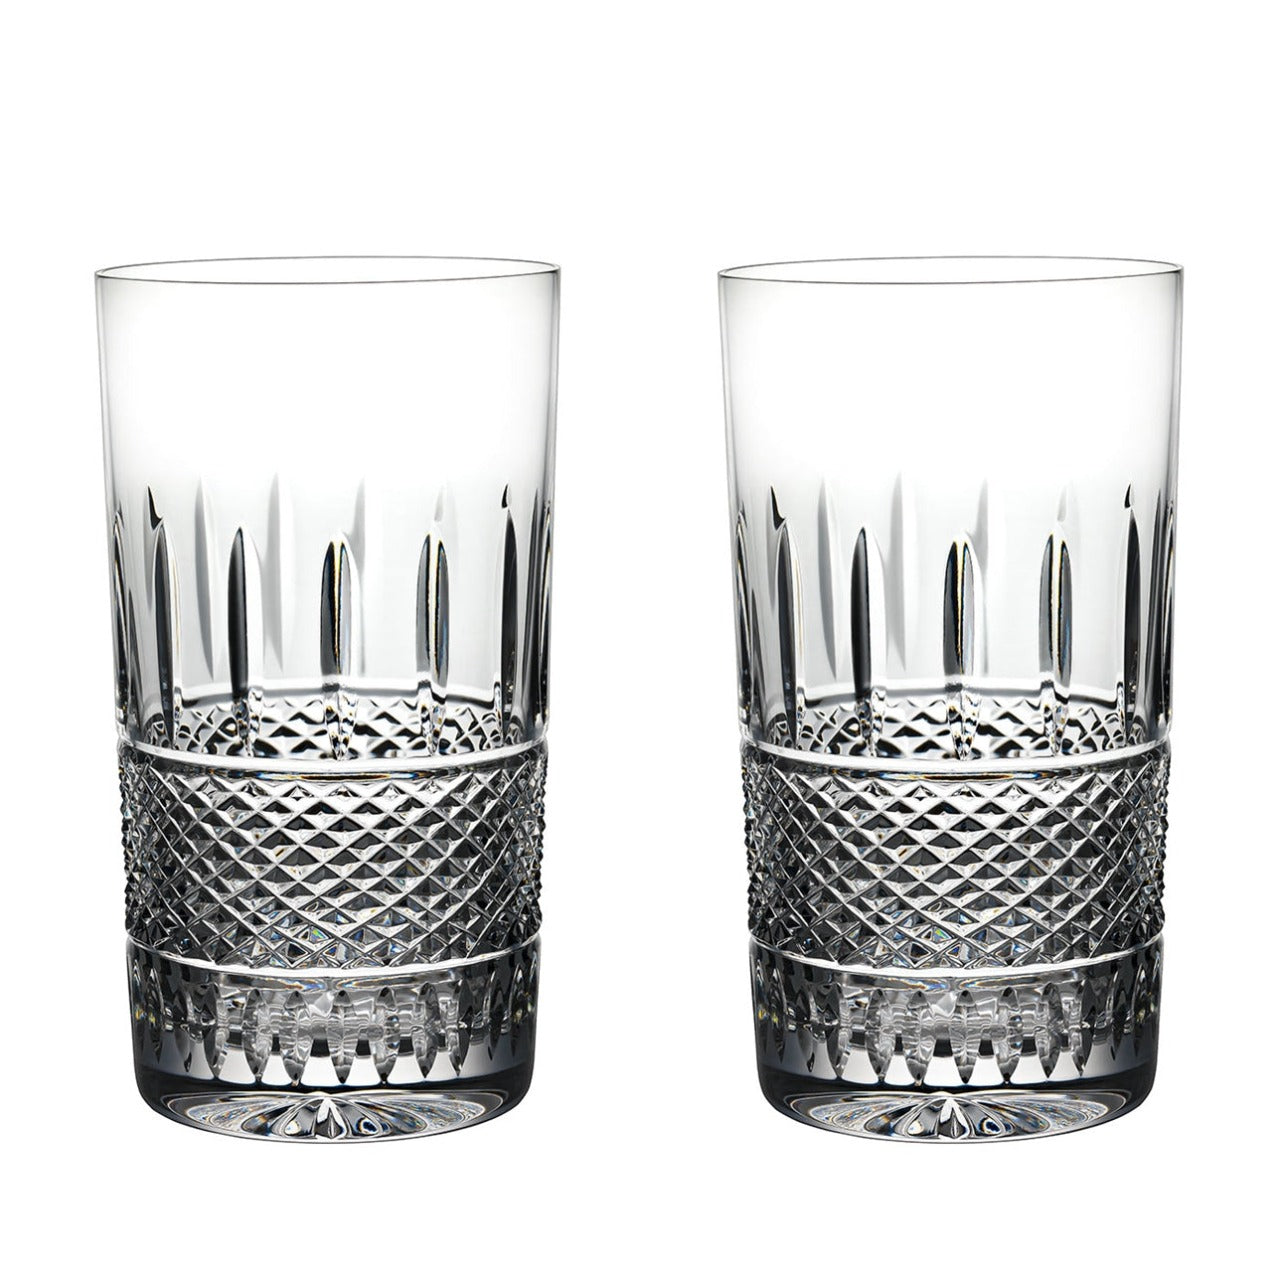 Waterford Crystal Irish Lace Hiball Pair  Inspired by the world-renowned patterns of Irish lace making, the Waterford Mastercraft Irish Lace Highball’s intricately cut design is unsurpassed.